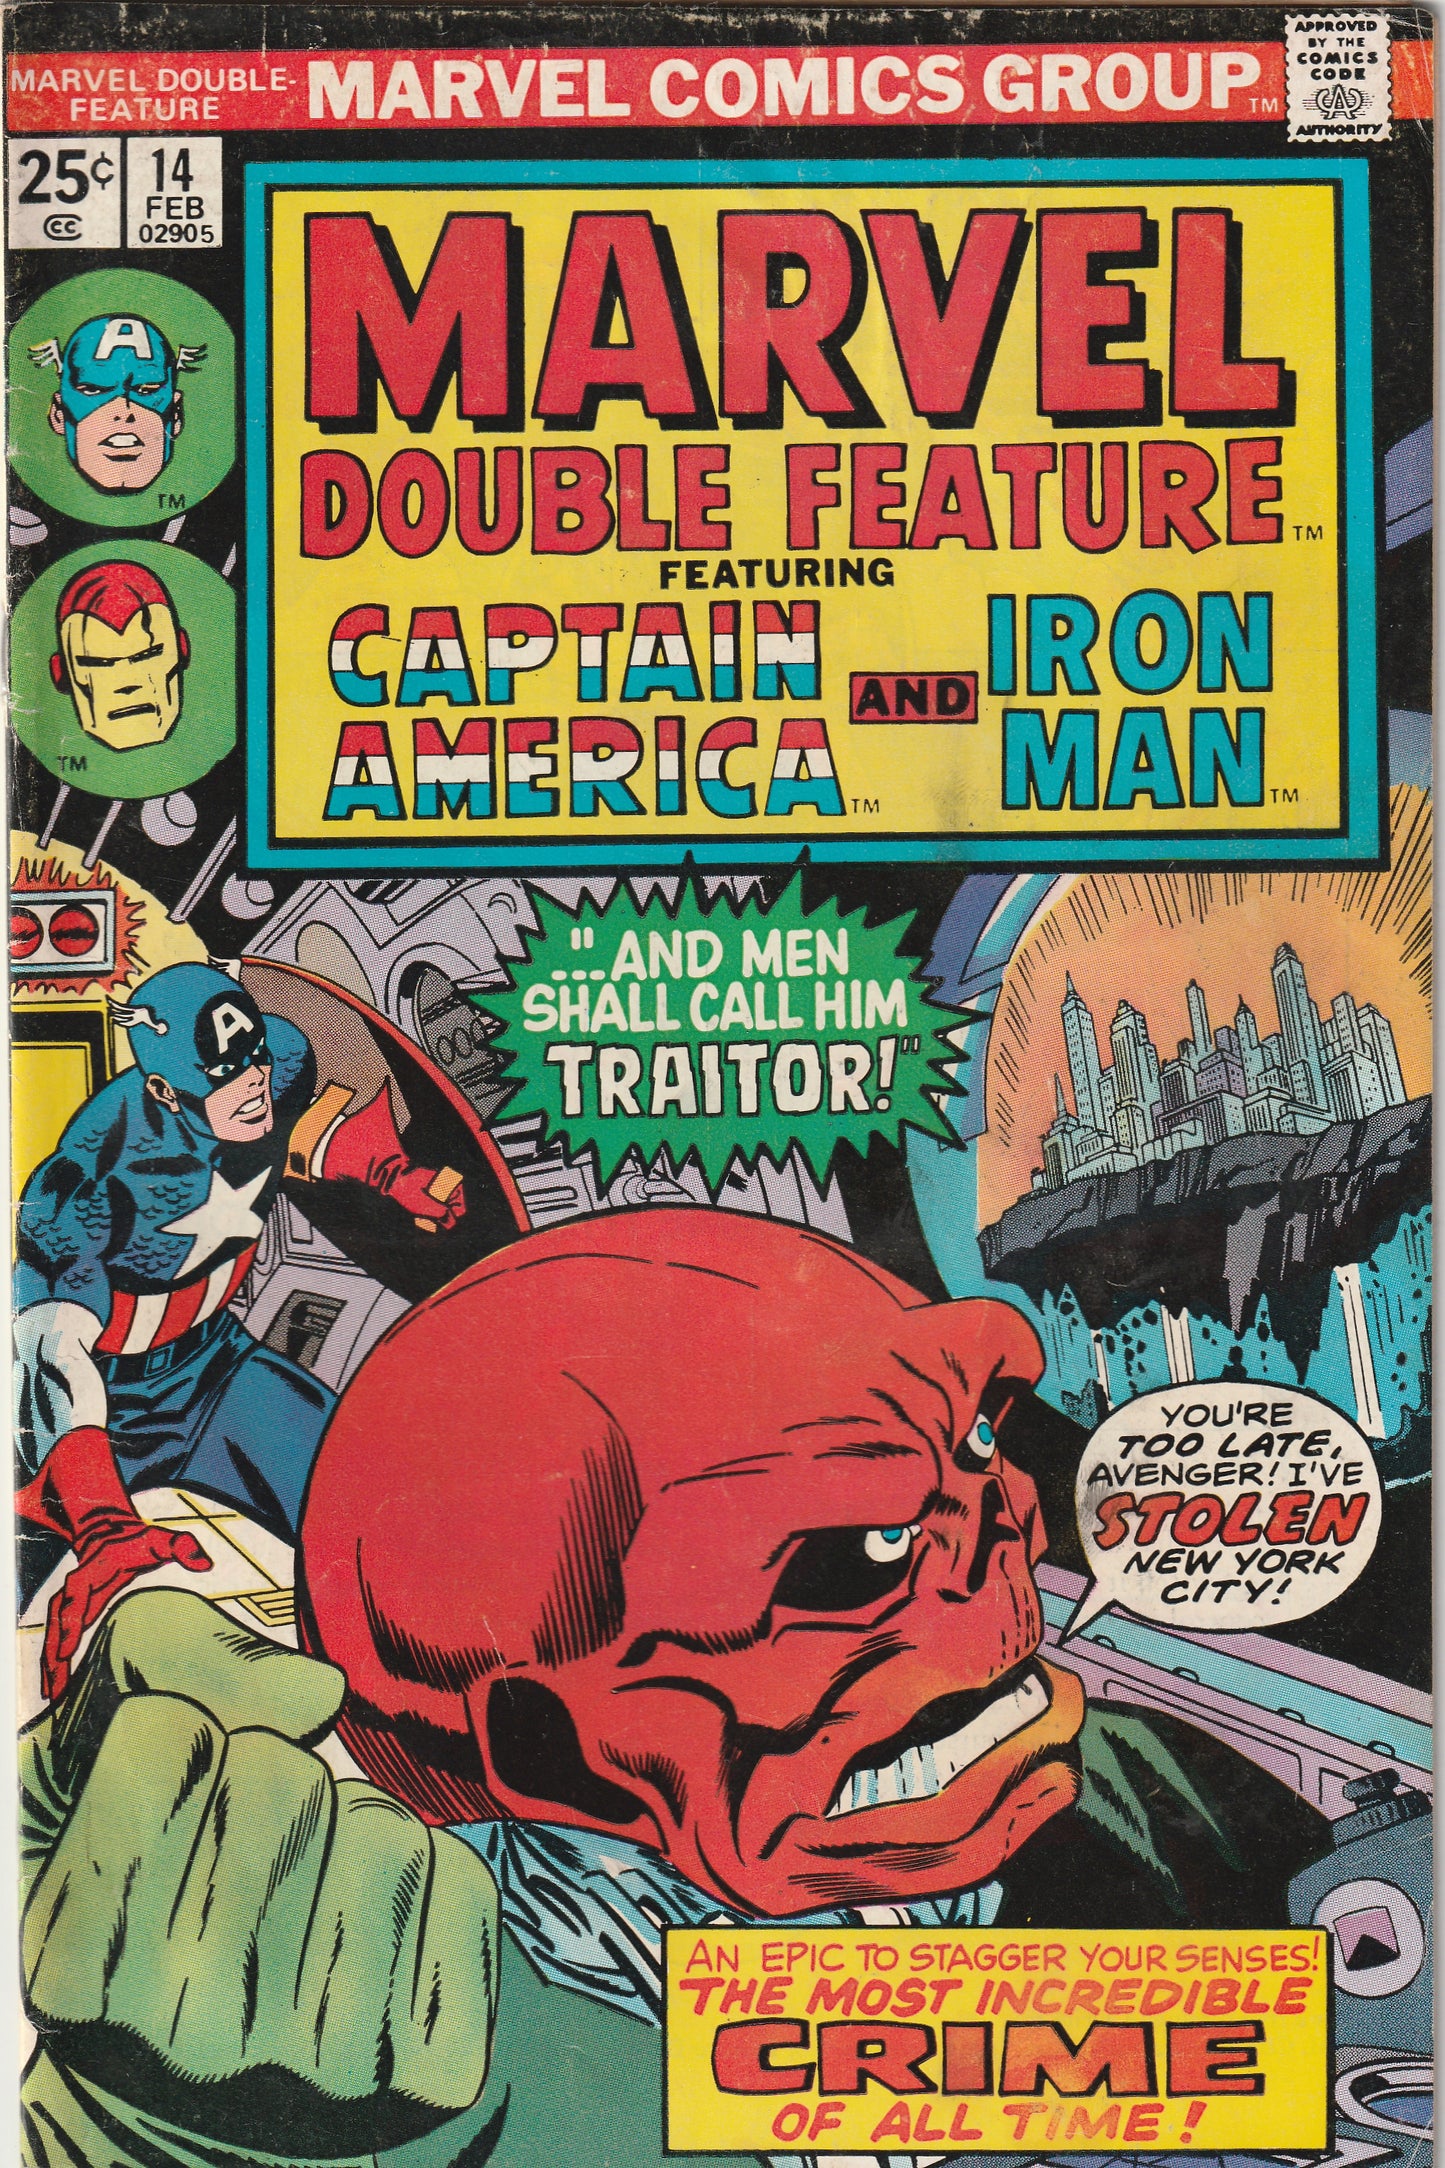 Marvel Double Feature #14 (1976) Featuring Captain America and Iron Man